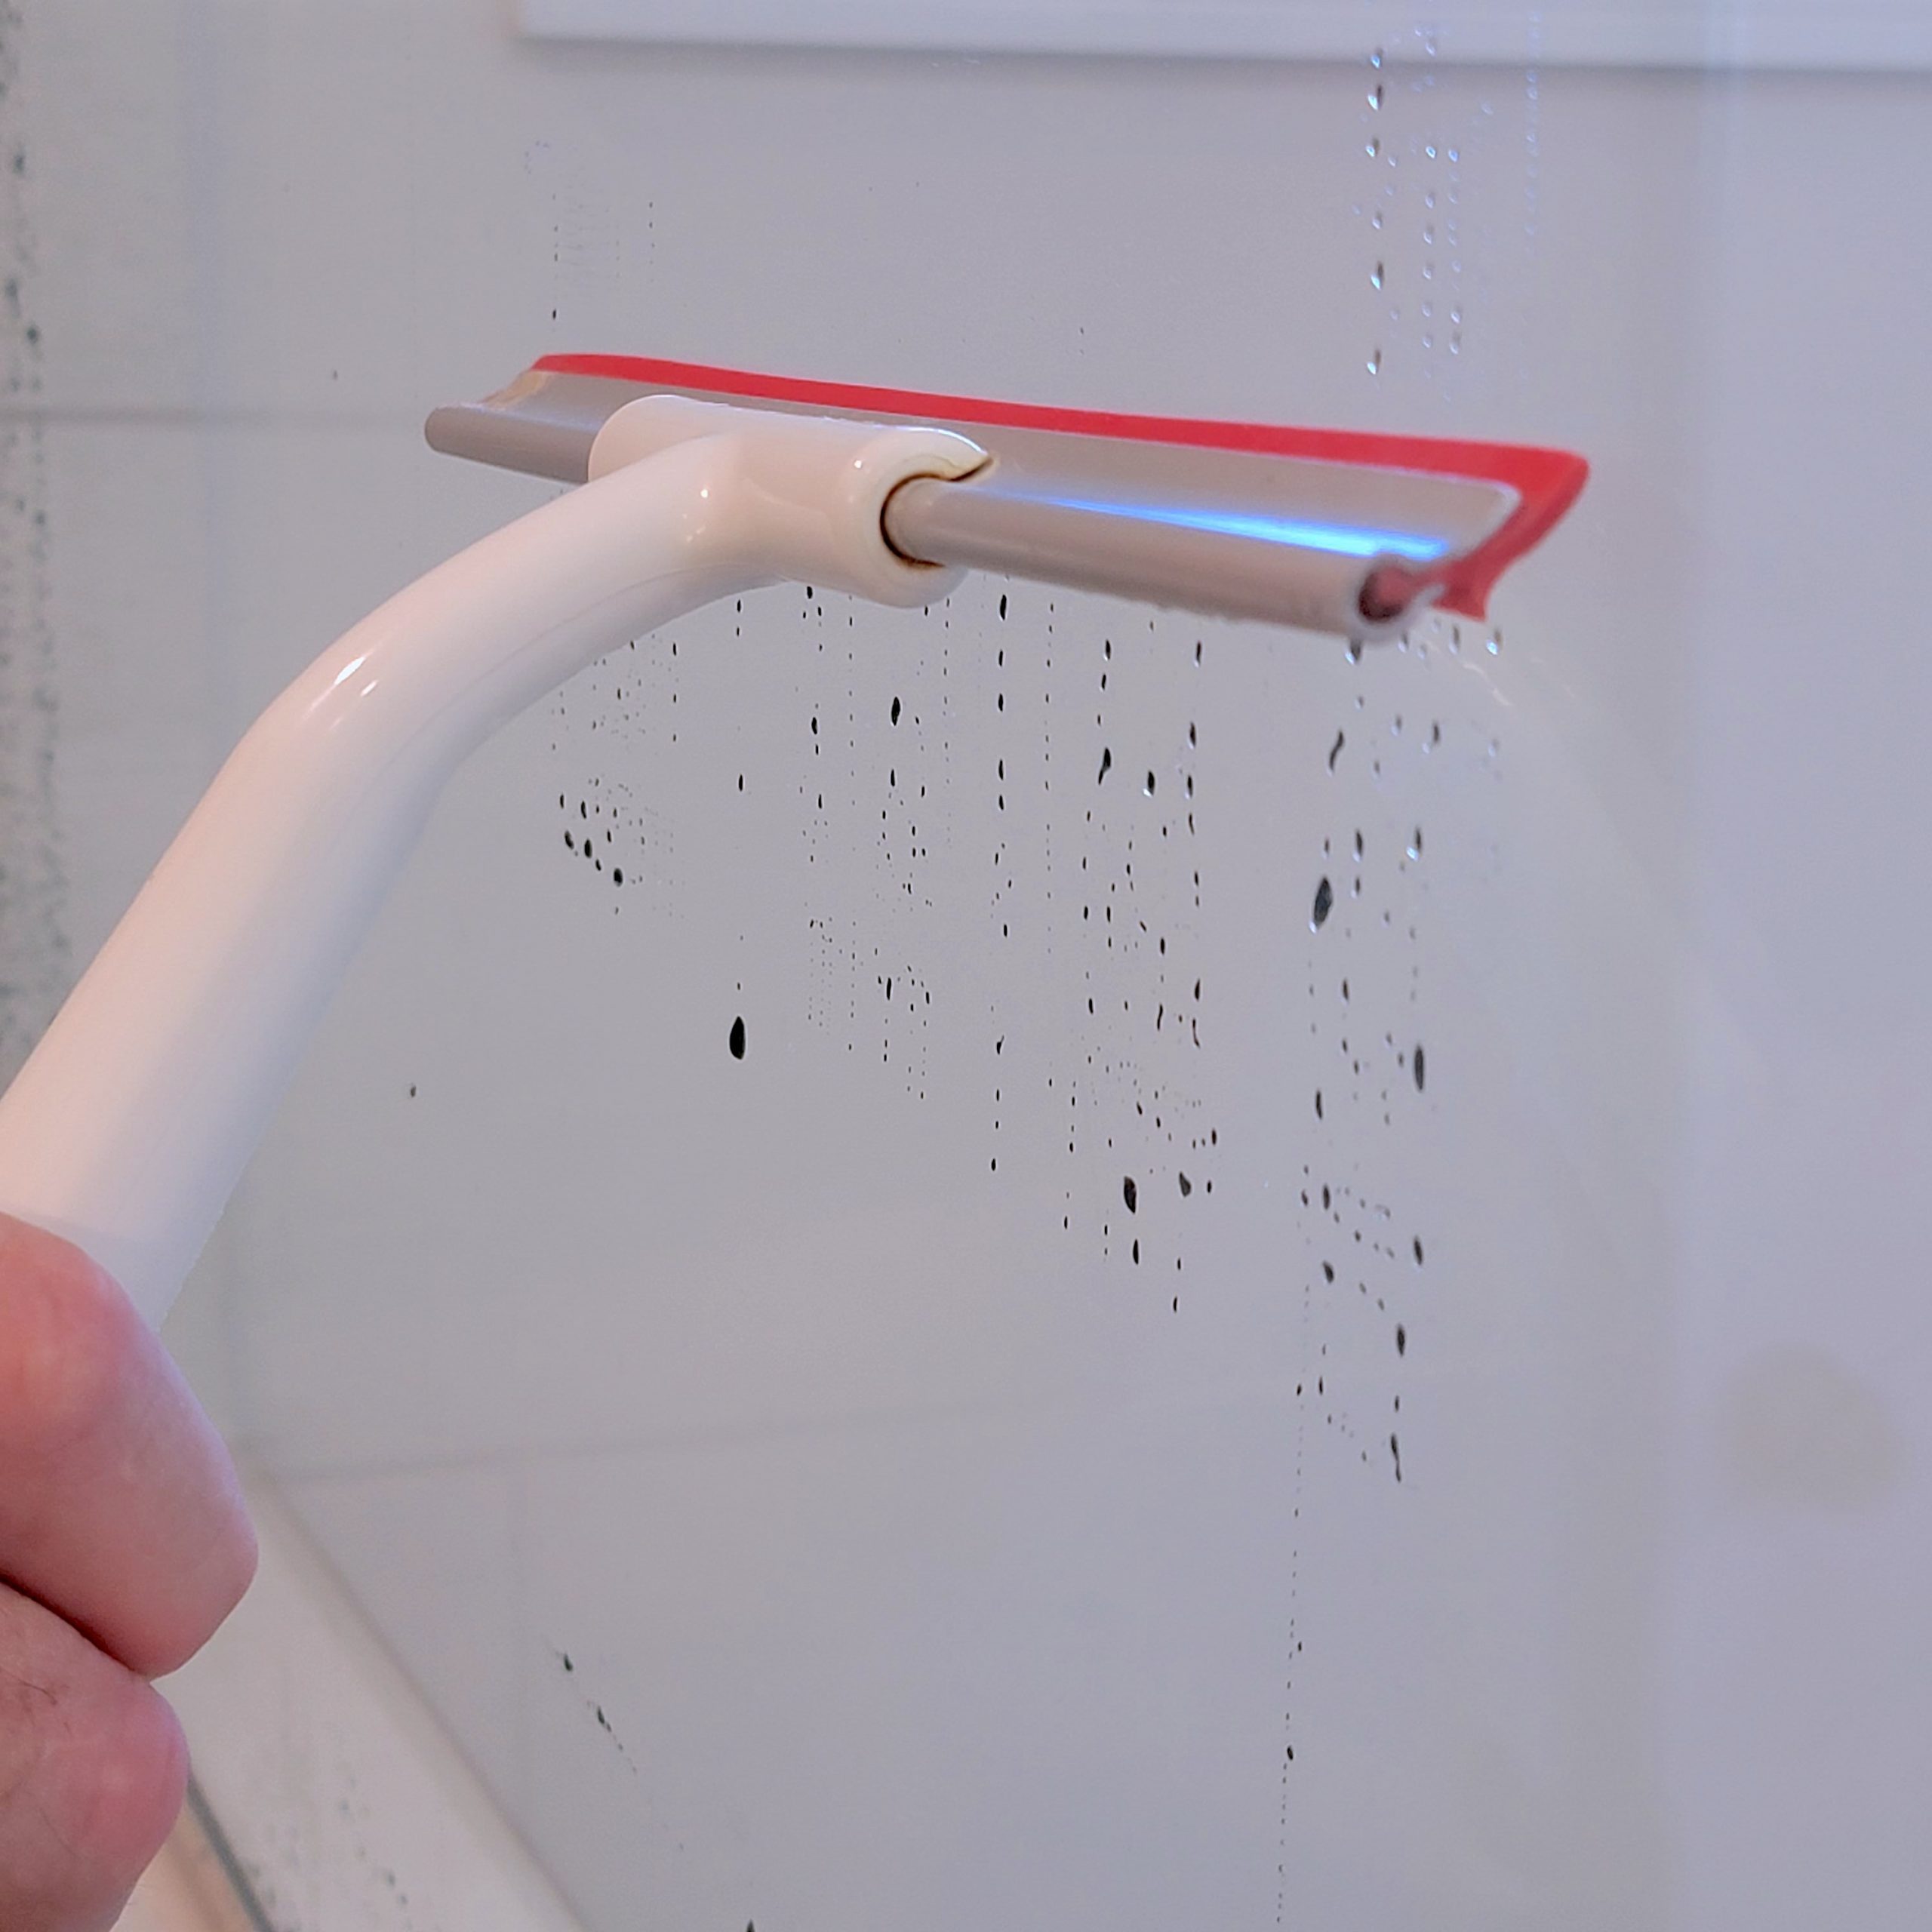 Shower Cleaning Squeegee being used on the shower glass